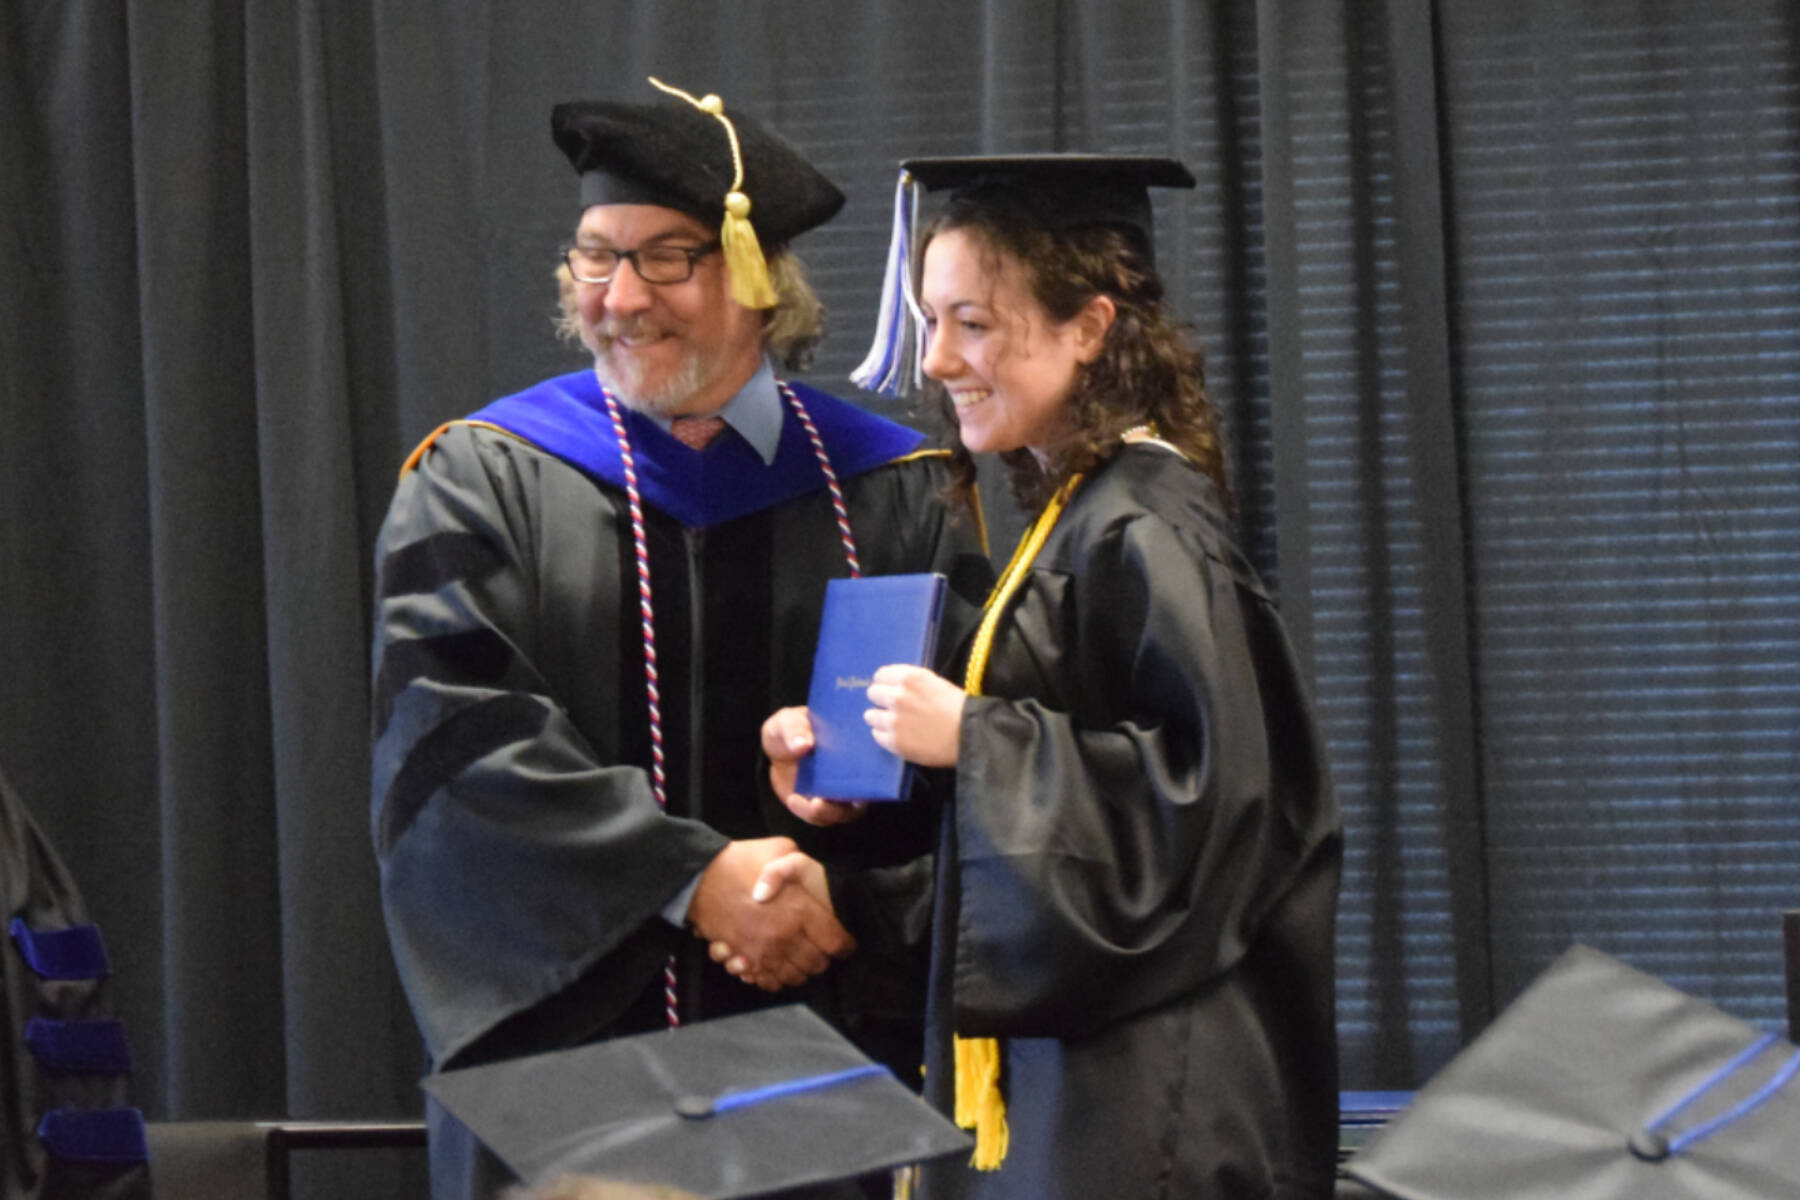 Kachemak Bay Campus Director Dr. Reid Brewer (left) presents valedictorian Elizabeth Rozeboom (right) with her Associate of Arts diploma during the 2023 KBC Commencement on Wednesday, May 10, 2023 in Homer, 秀色短视频.